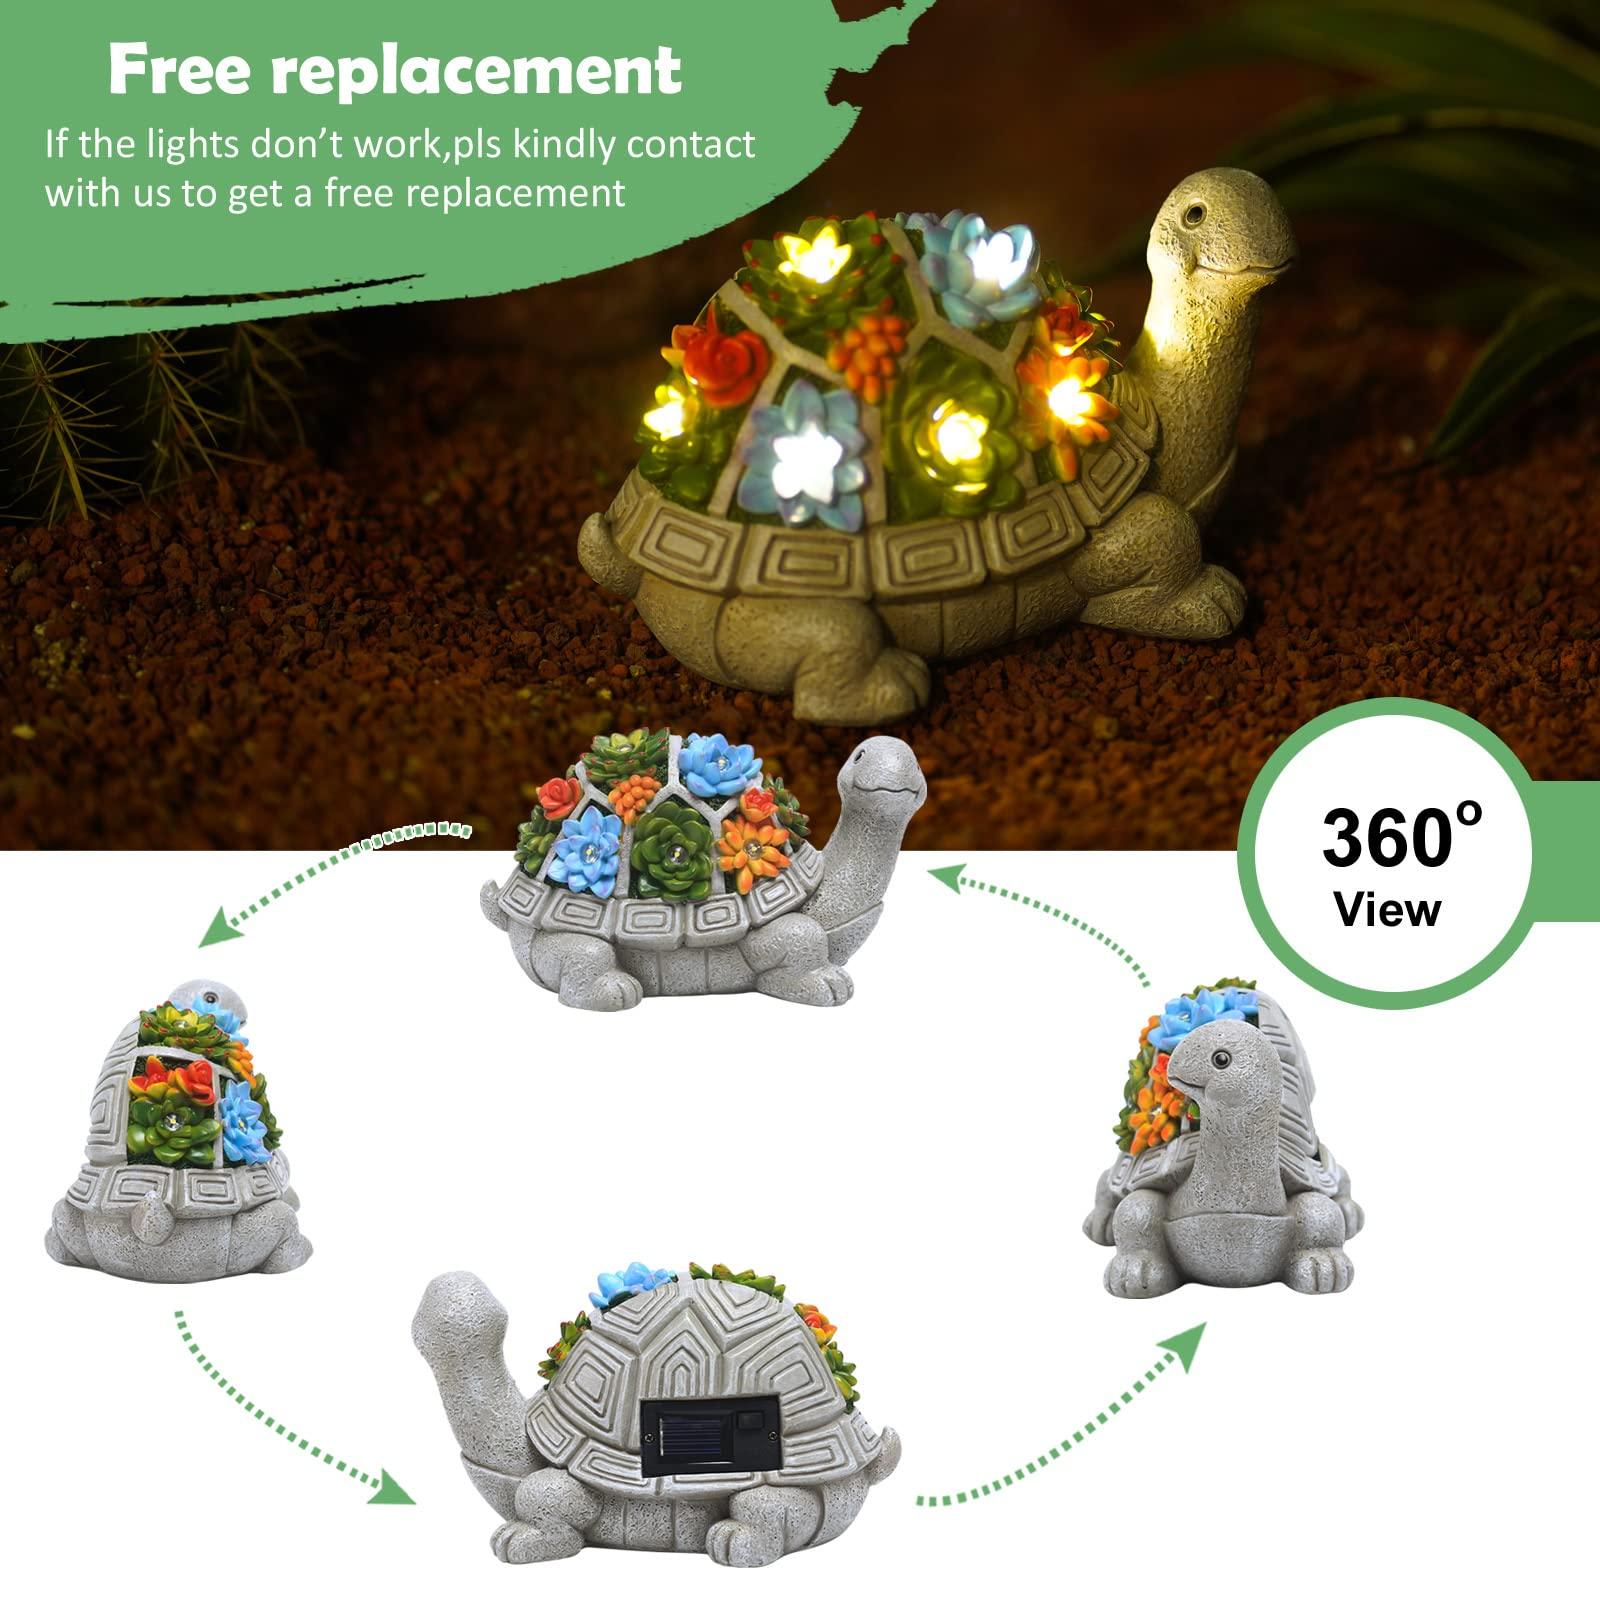 Nacome Solar Garden Outdoor Statues Turtle with Succulent and 7 LED Lights - Lawn Decor Tortoise Statue for Patio, Balcony, Yard Ornament - Unique Housewarming Gifts - CookCave